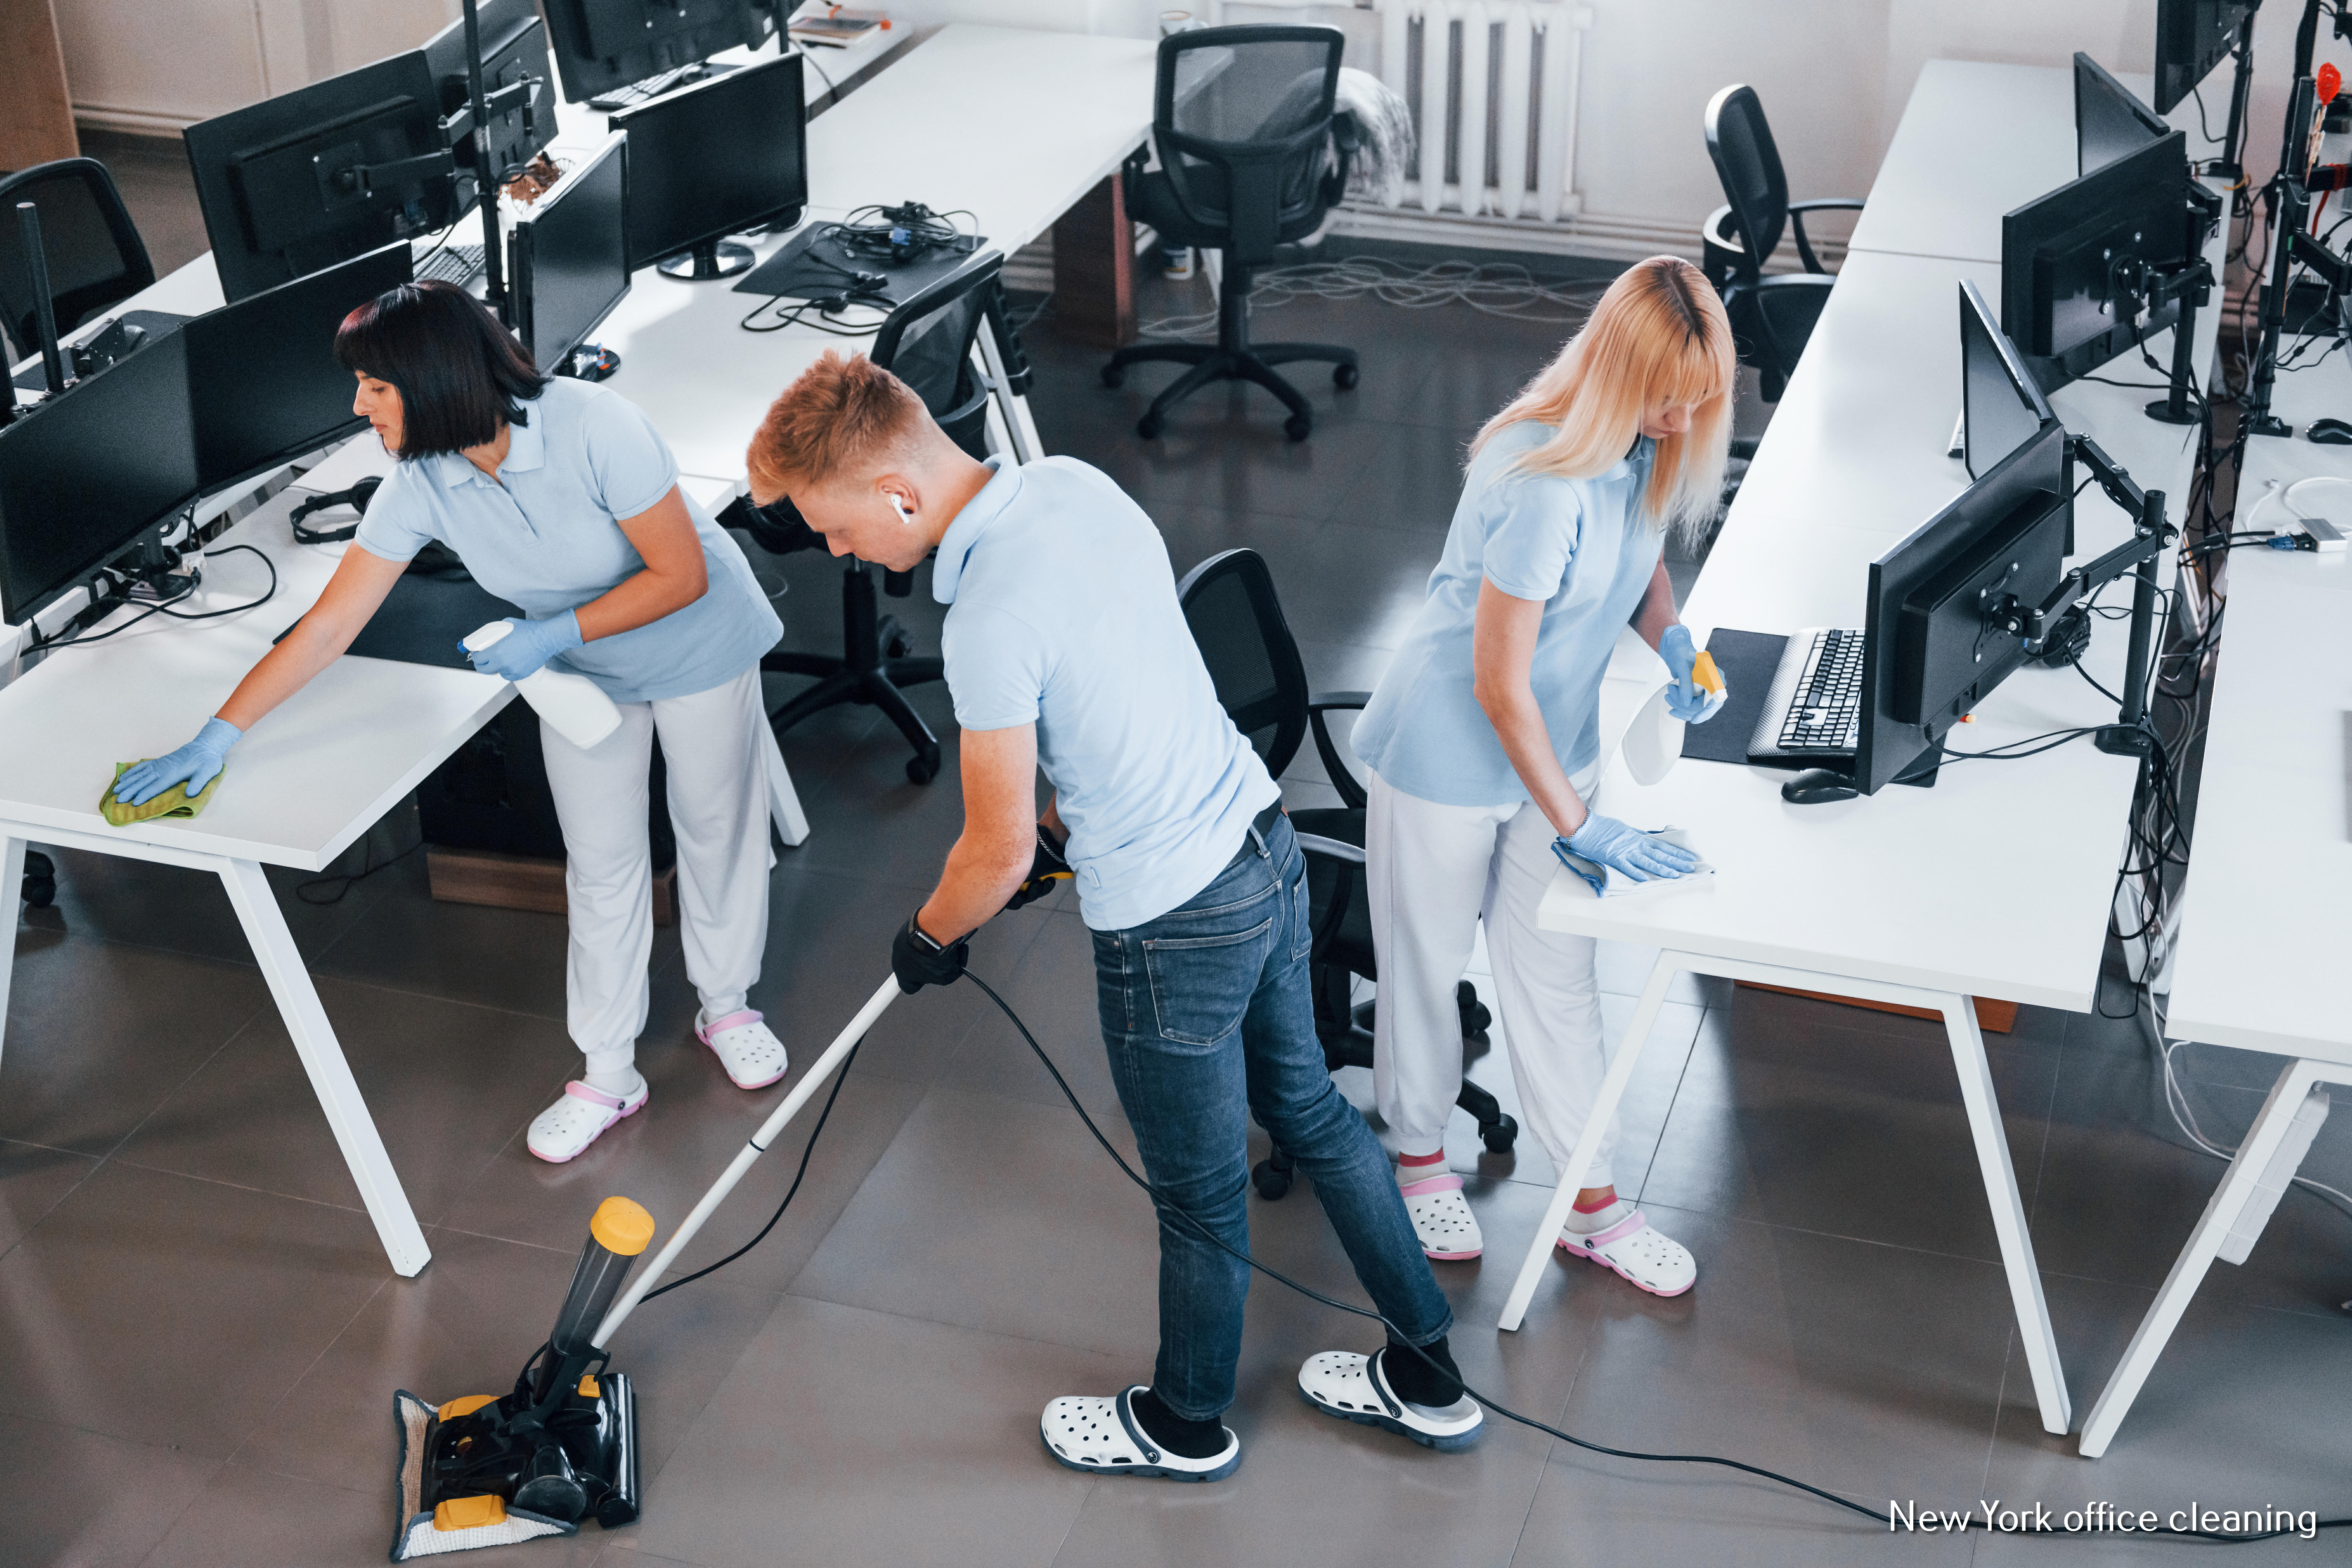 Impeccable Cleaning NYC Highlighted the Benefits of Hiring a Professional Office Cleaning Service